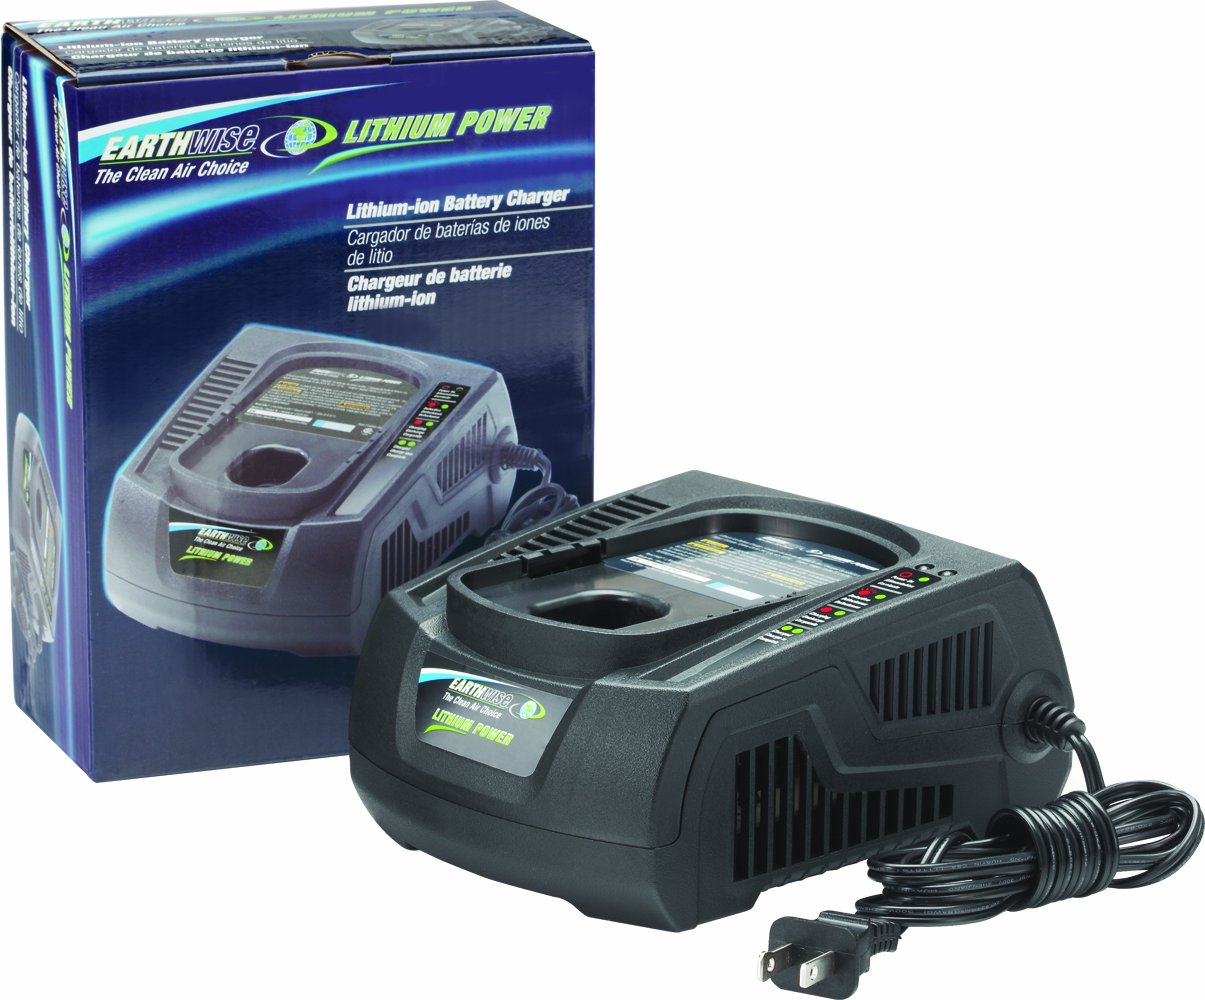 Earthwise 18V Lithium Battery Charger